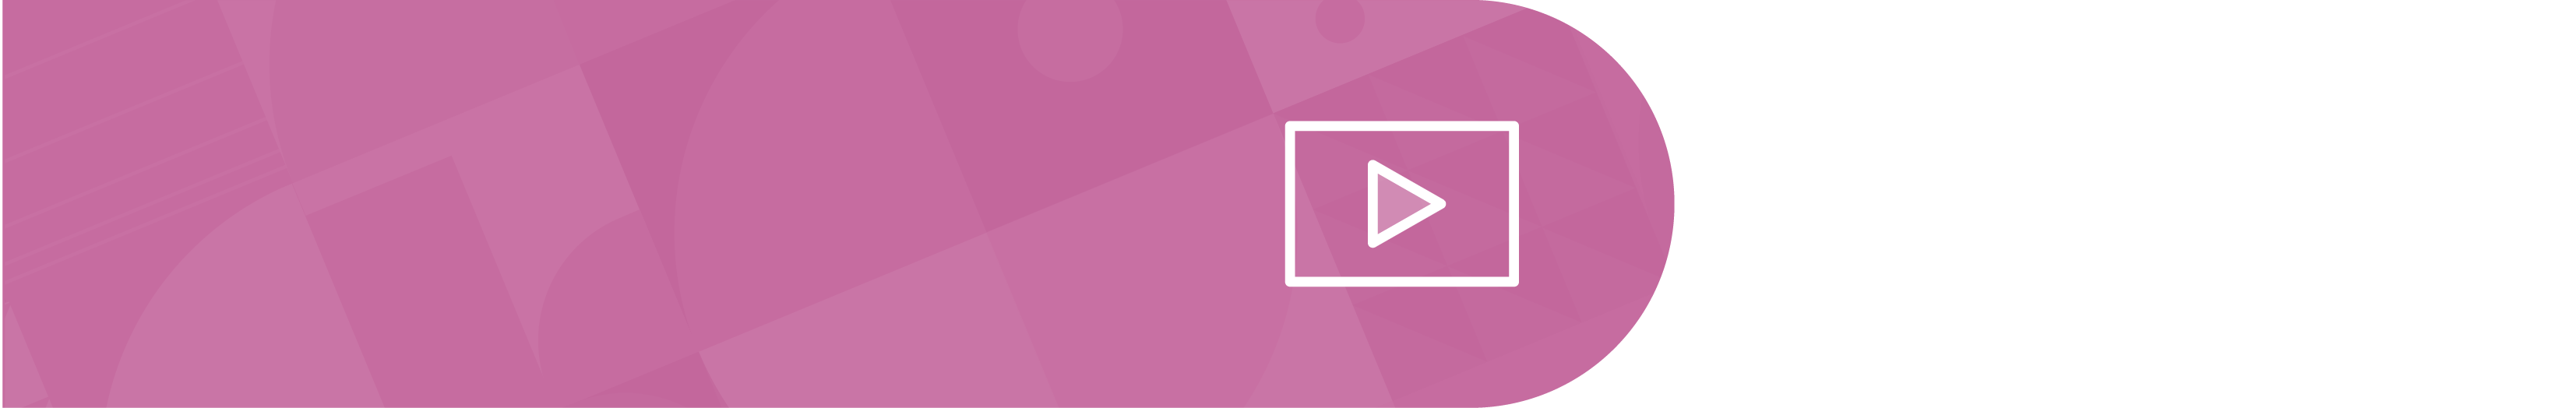 Video and Webinar Header Graphic